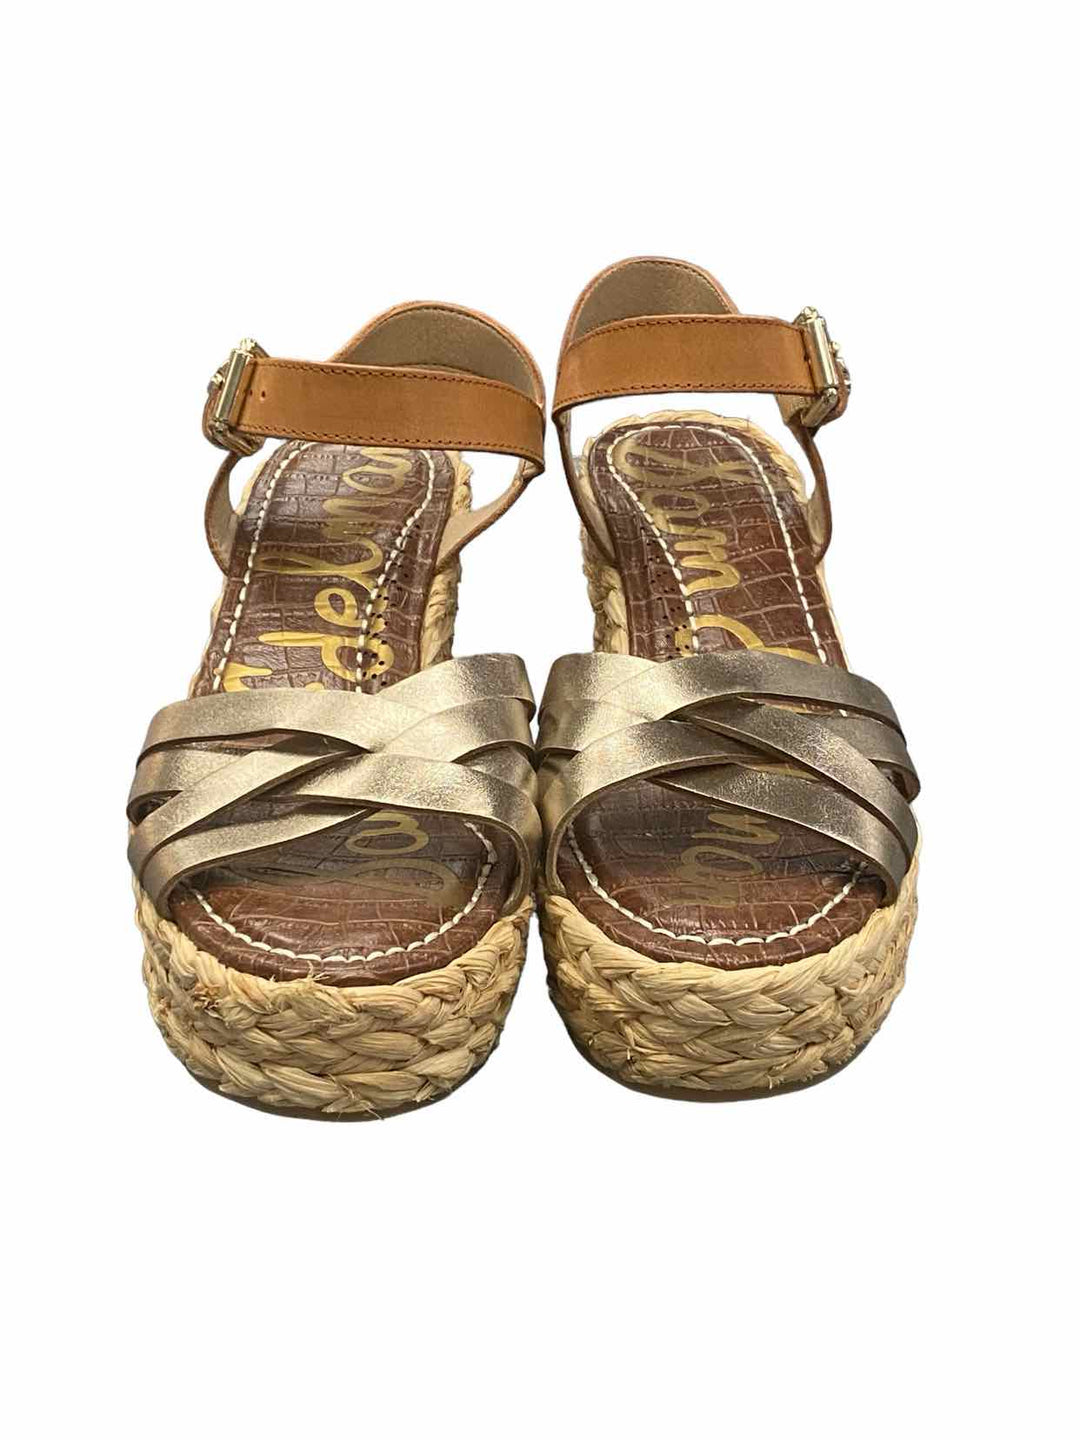 Sam Edelmon Shoe Size 6.5 Silver Brown Leather NWOT Sandals